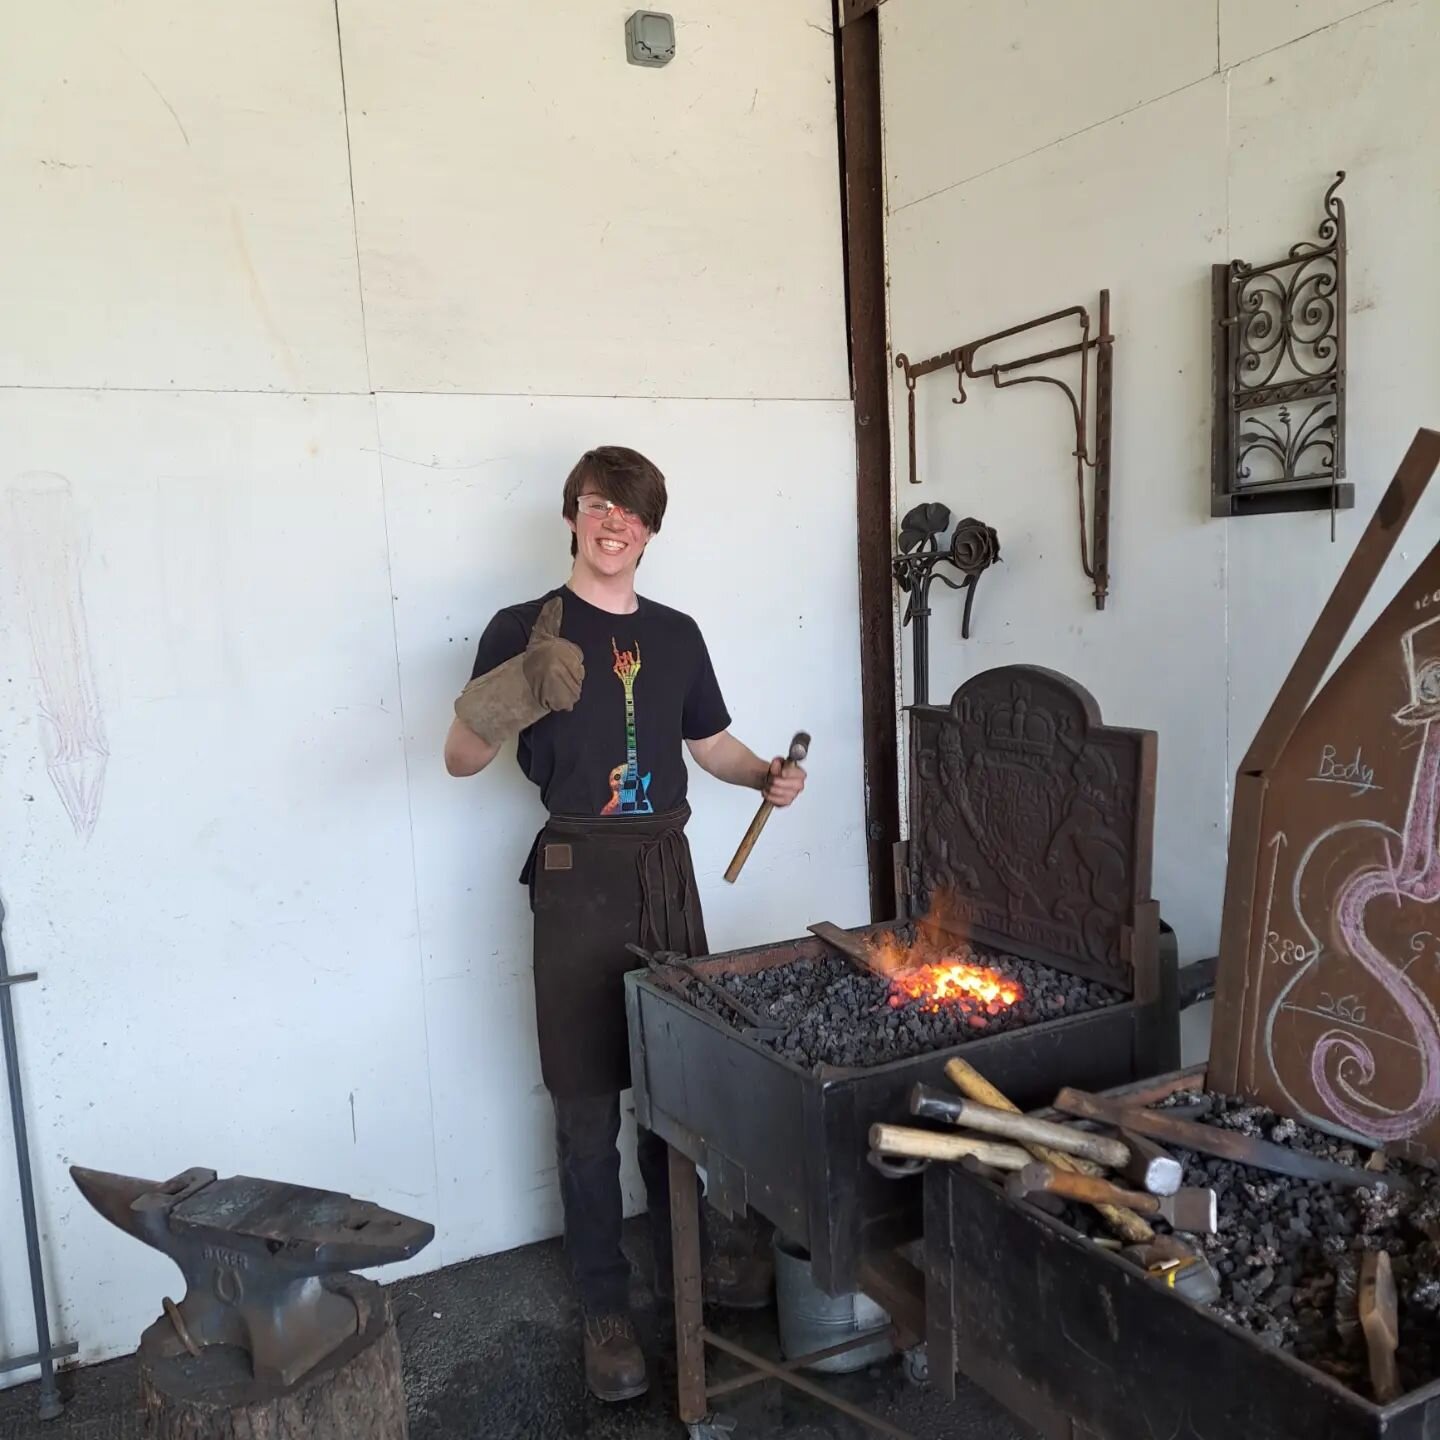 Had this chap through the forge on work experience  last week. When we first met a few months ago, I asked him to design something that he would like to make that reflected his personality. Nice job, Sam.